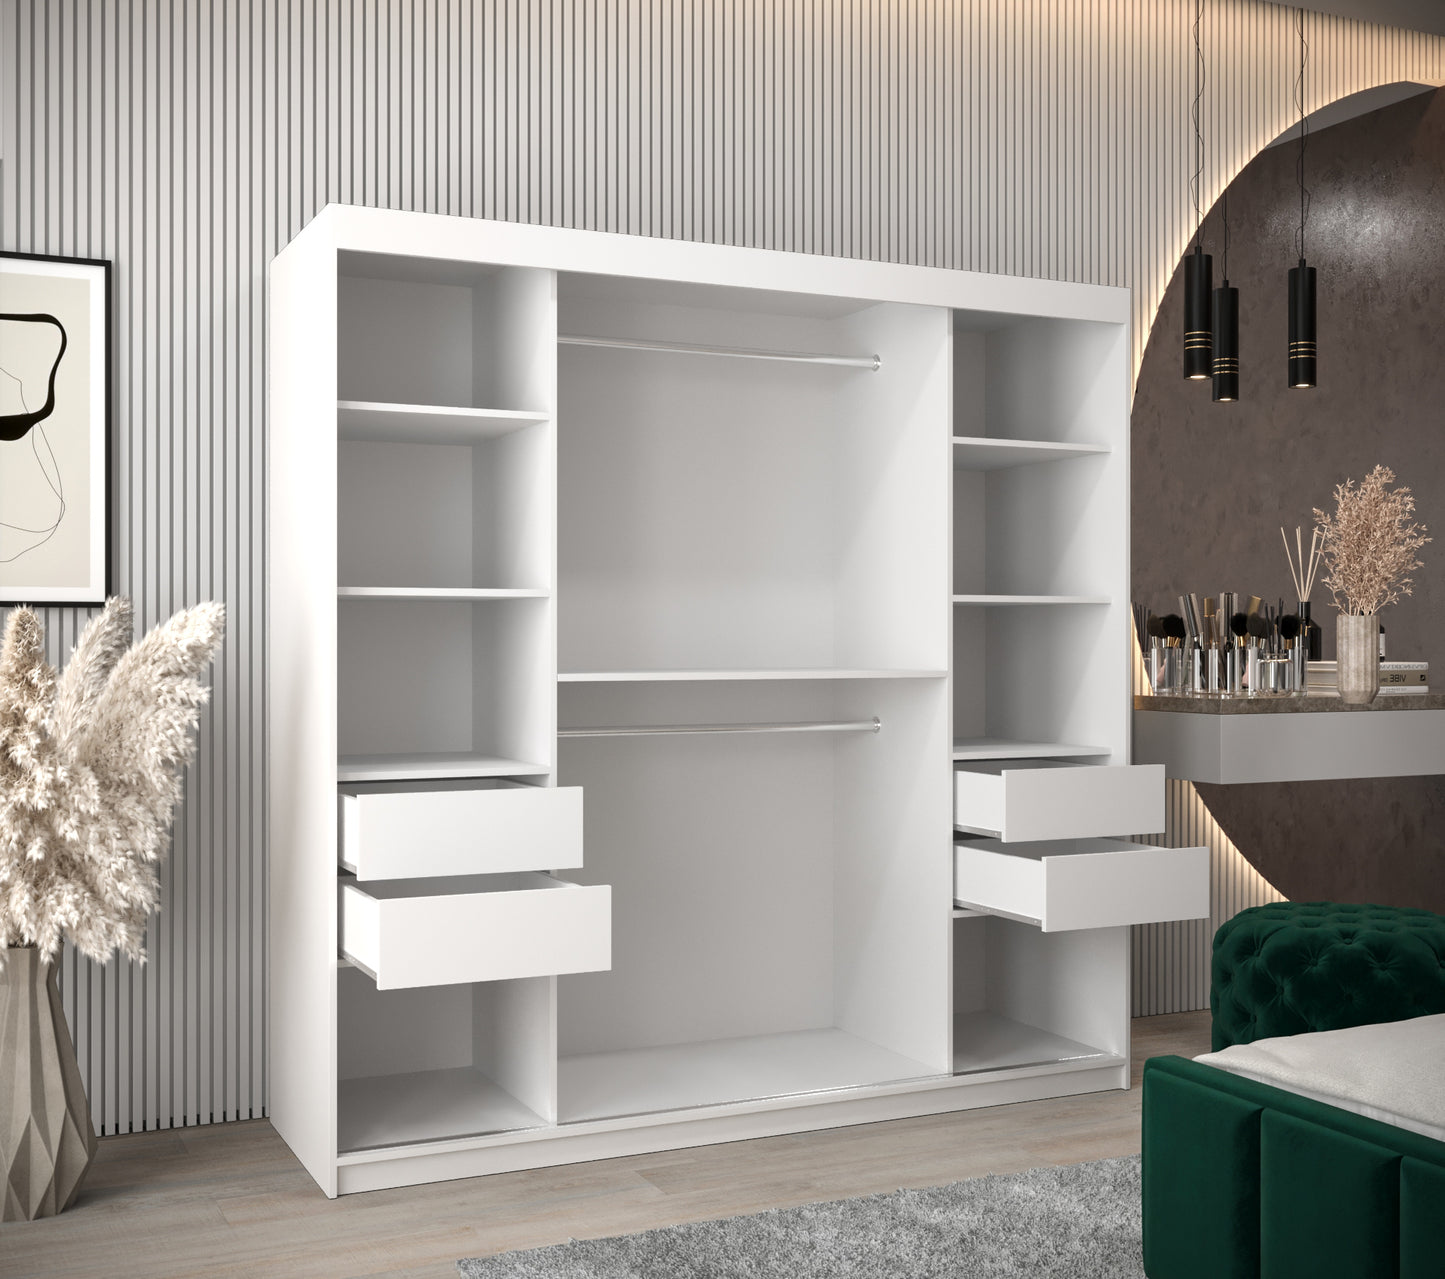 LOUVRE - Wardrobe with 2 Sliding Doors Black or White with Shelves, Rails, Drawers Optional >200cm<